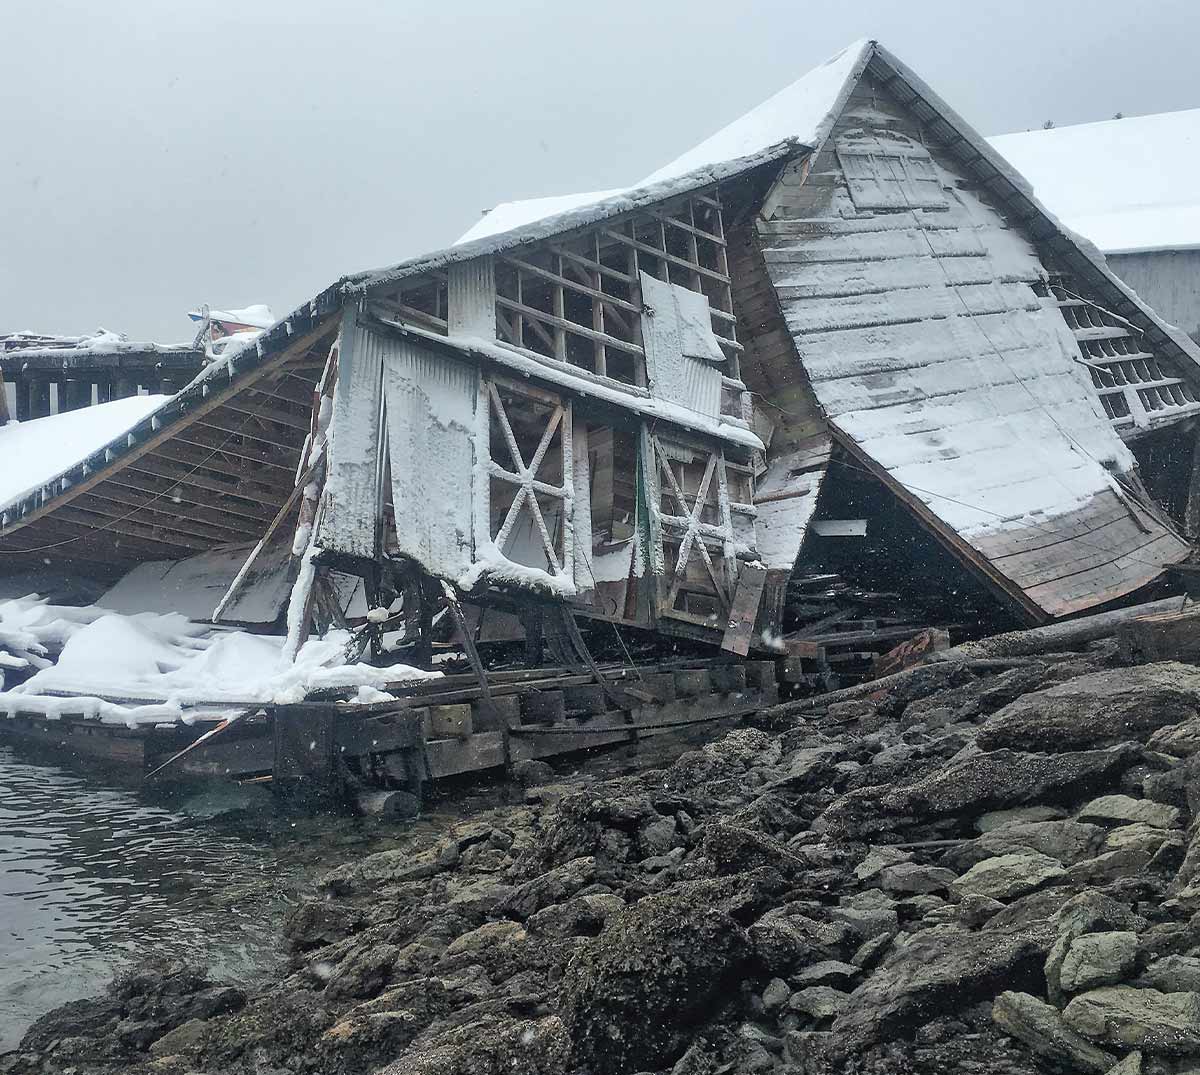 A dock structure collapsed in the winter